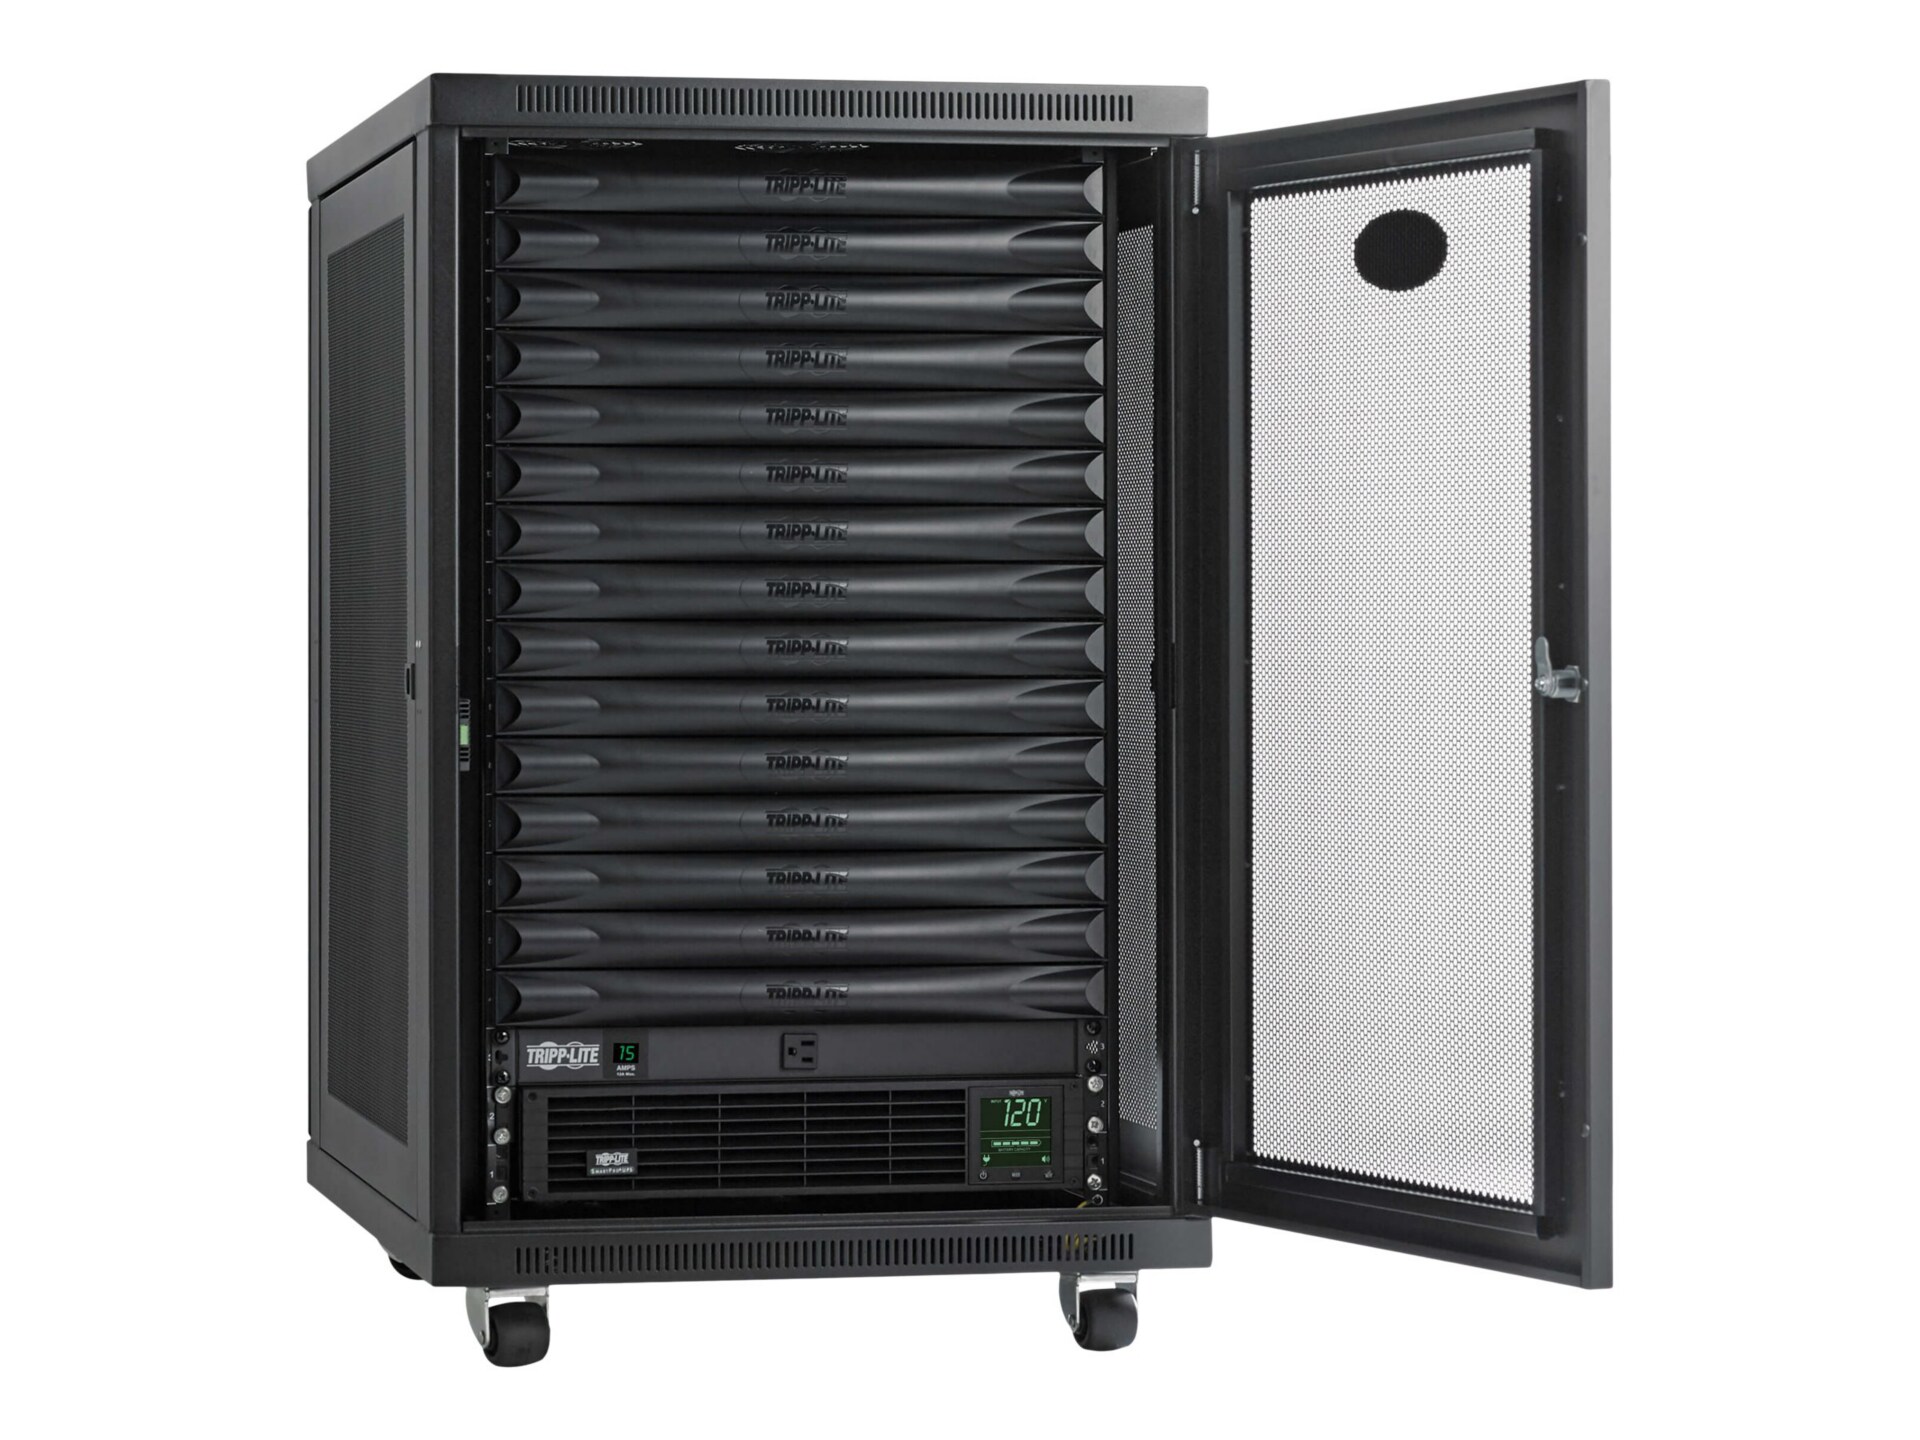 Tripp Lite EdgeReady Micro Data Center - 15U 1.5 kVA UPS, Network Management and Metered PDU, 120V Assembled/Tested Unit